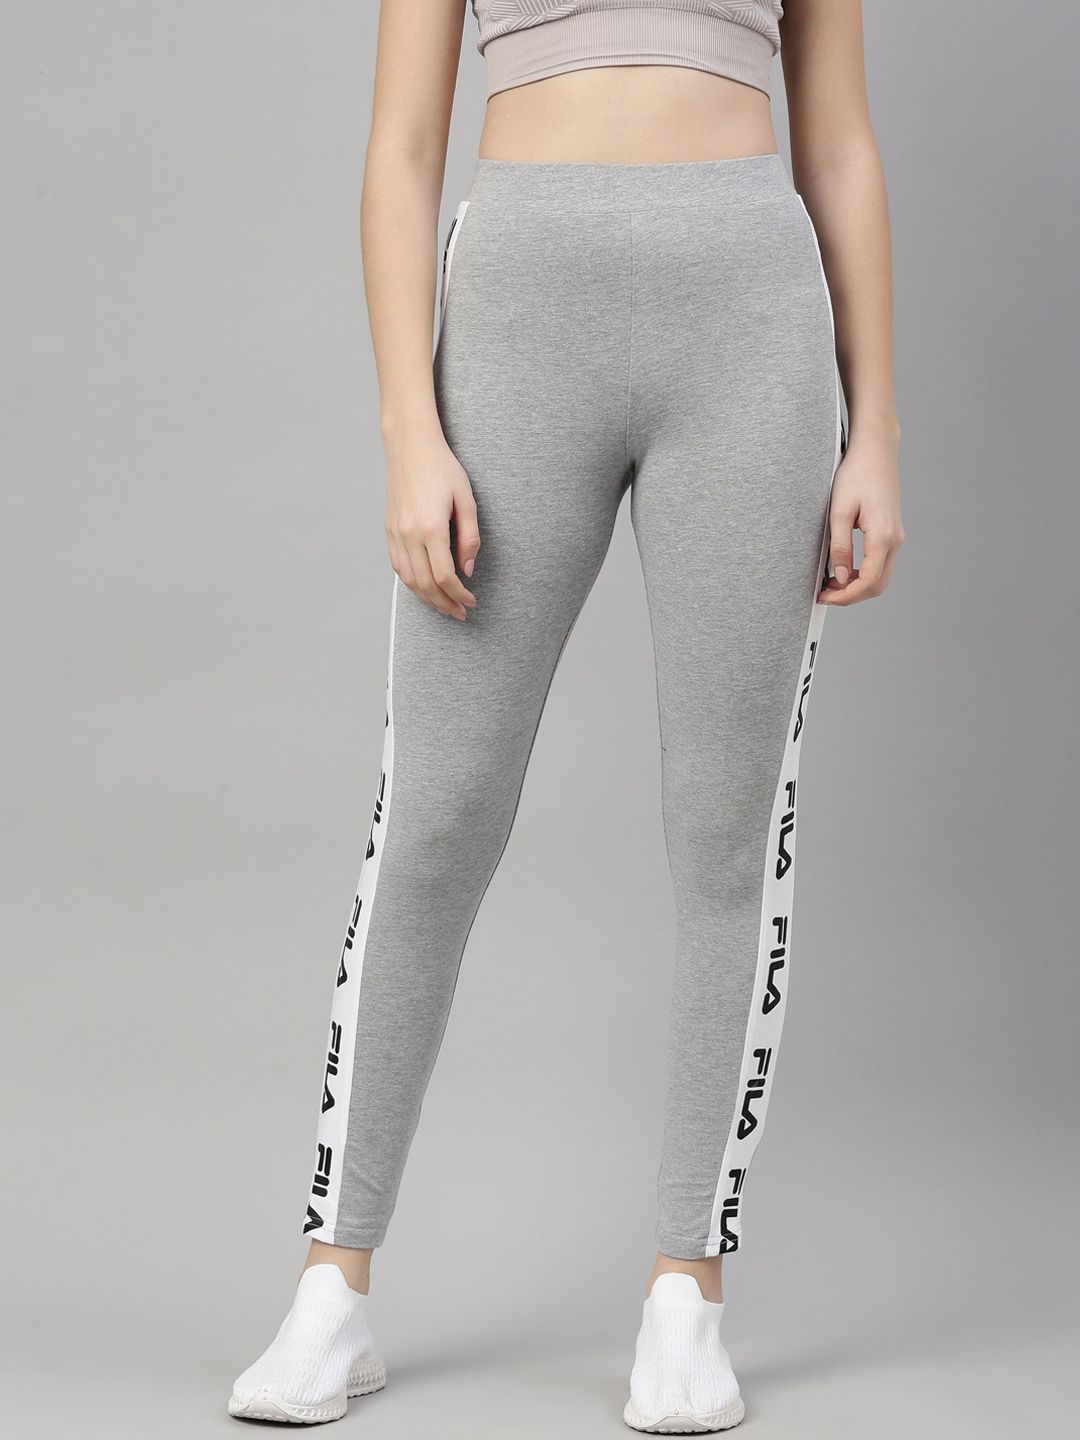 FILA Women Grey Solid Track Pants Price in India